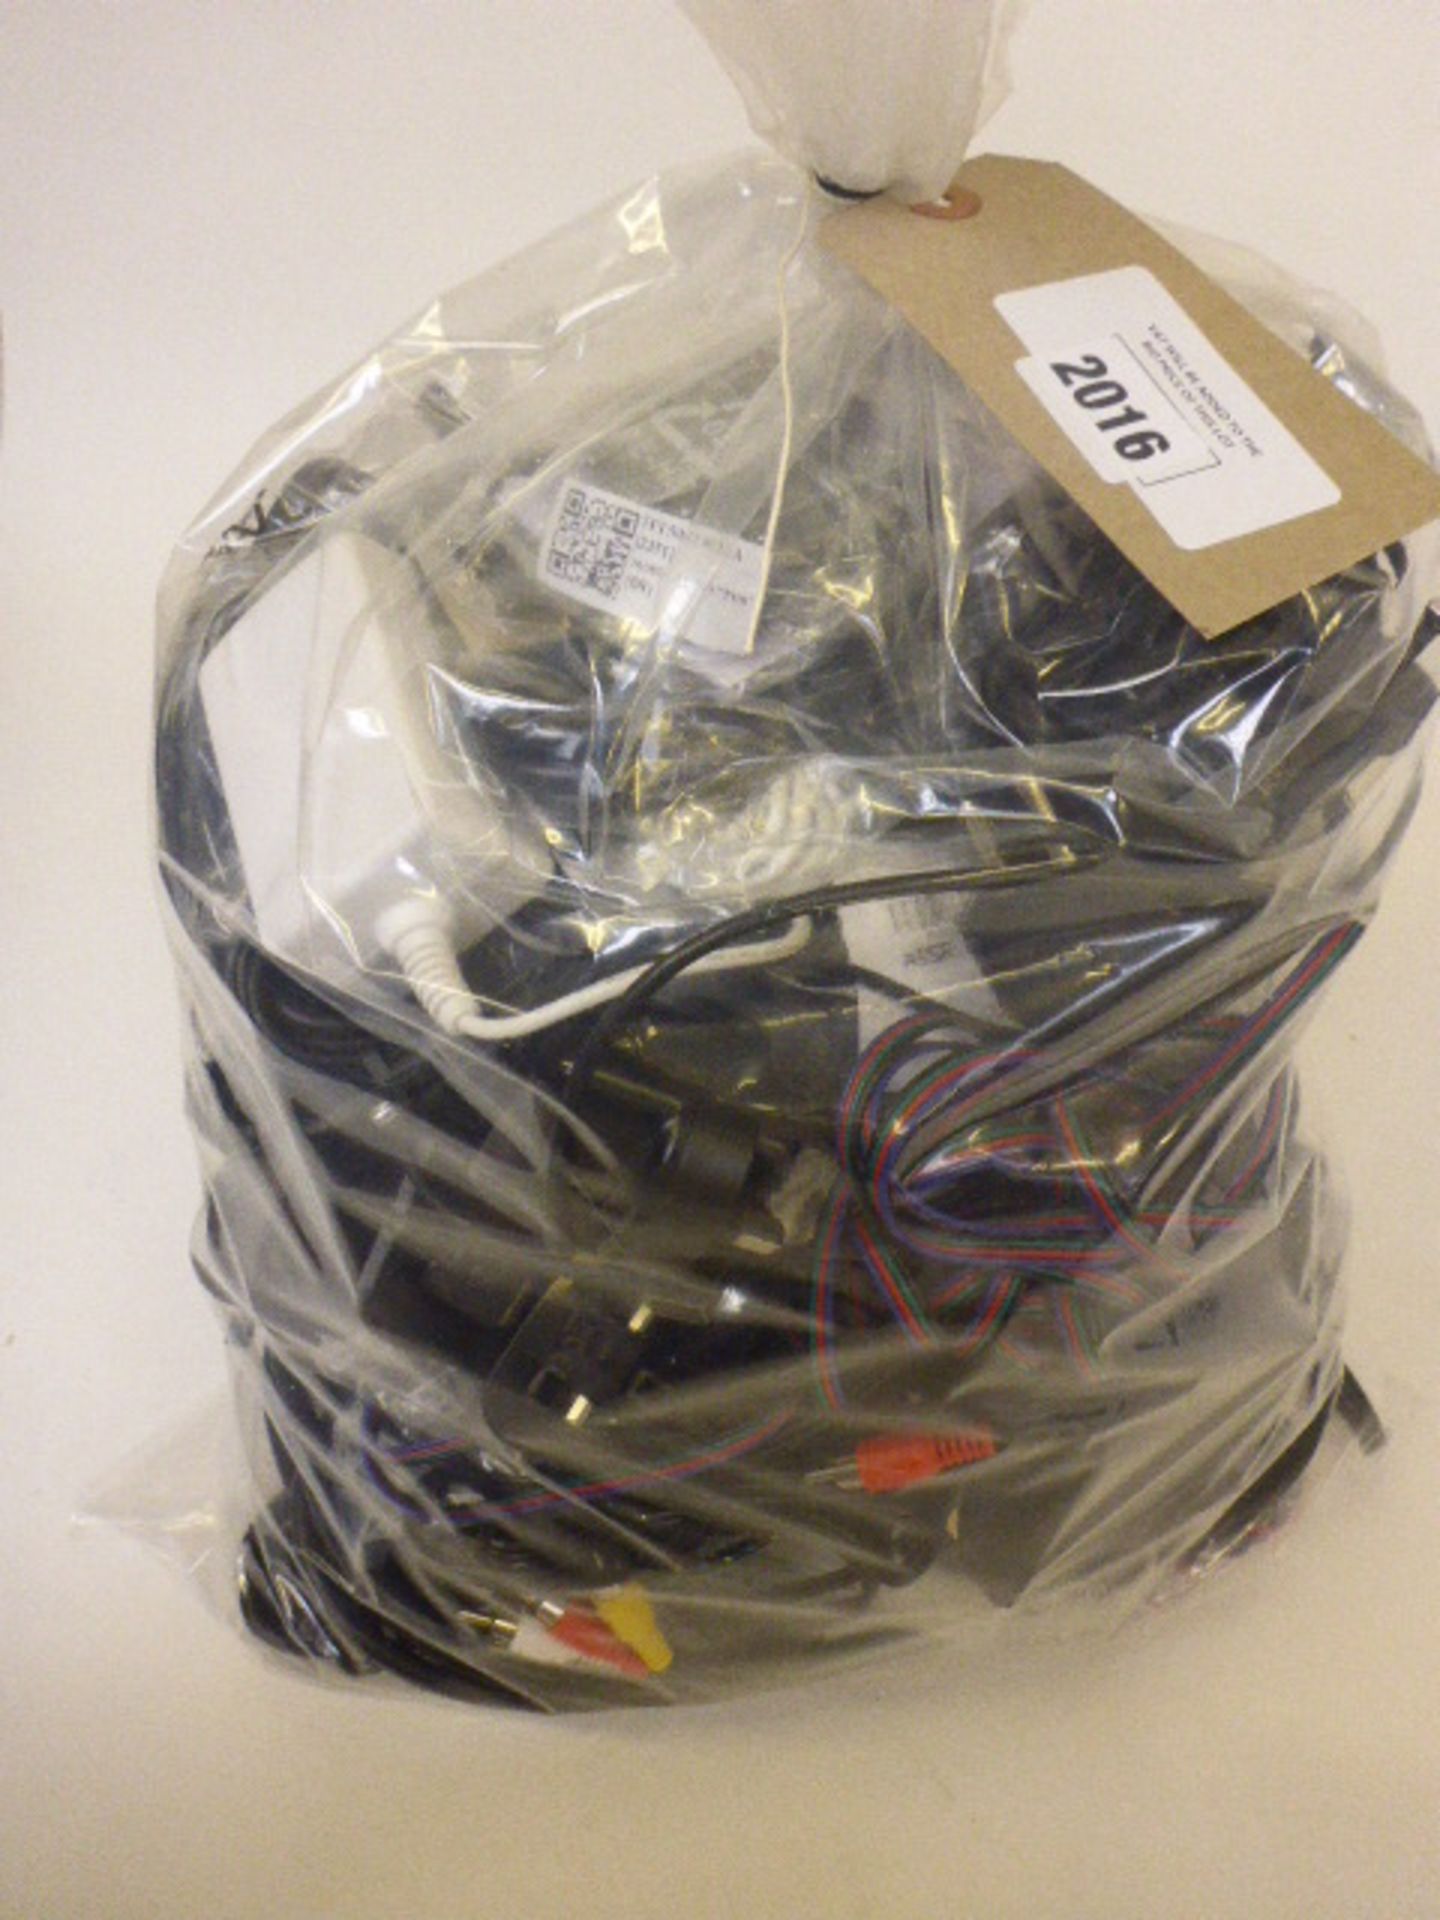 Bag containing assorted power supplies, cables and leads